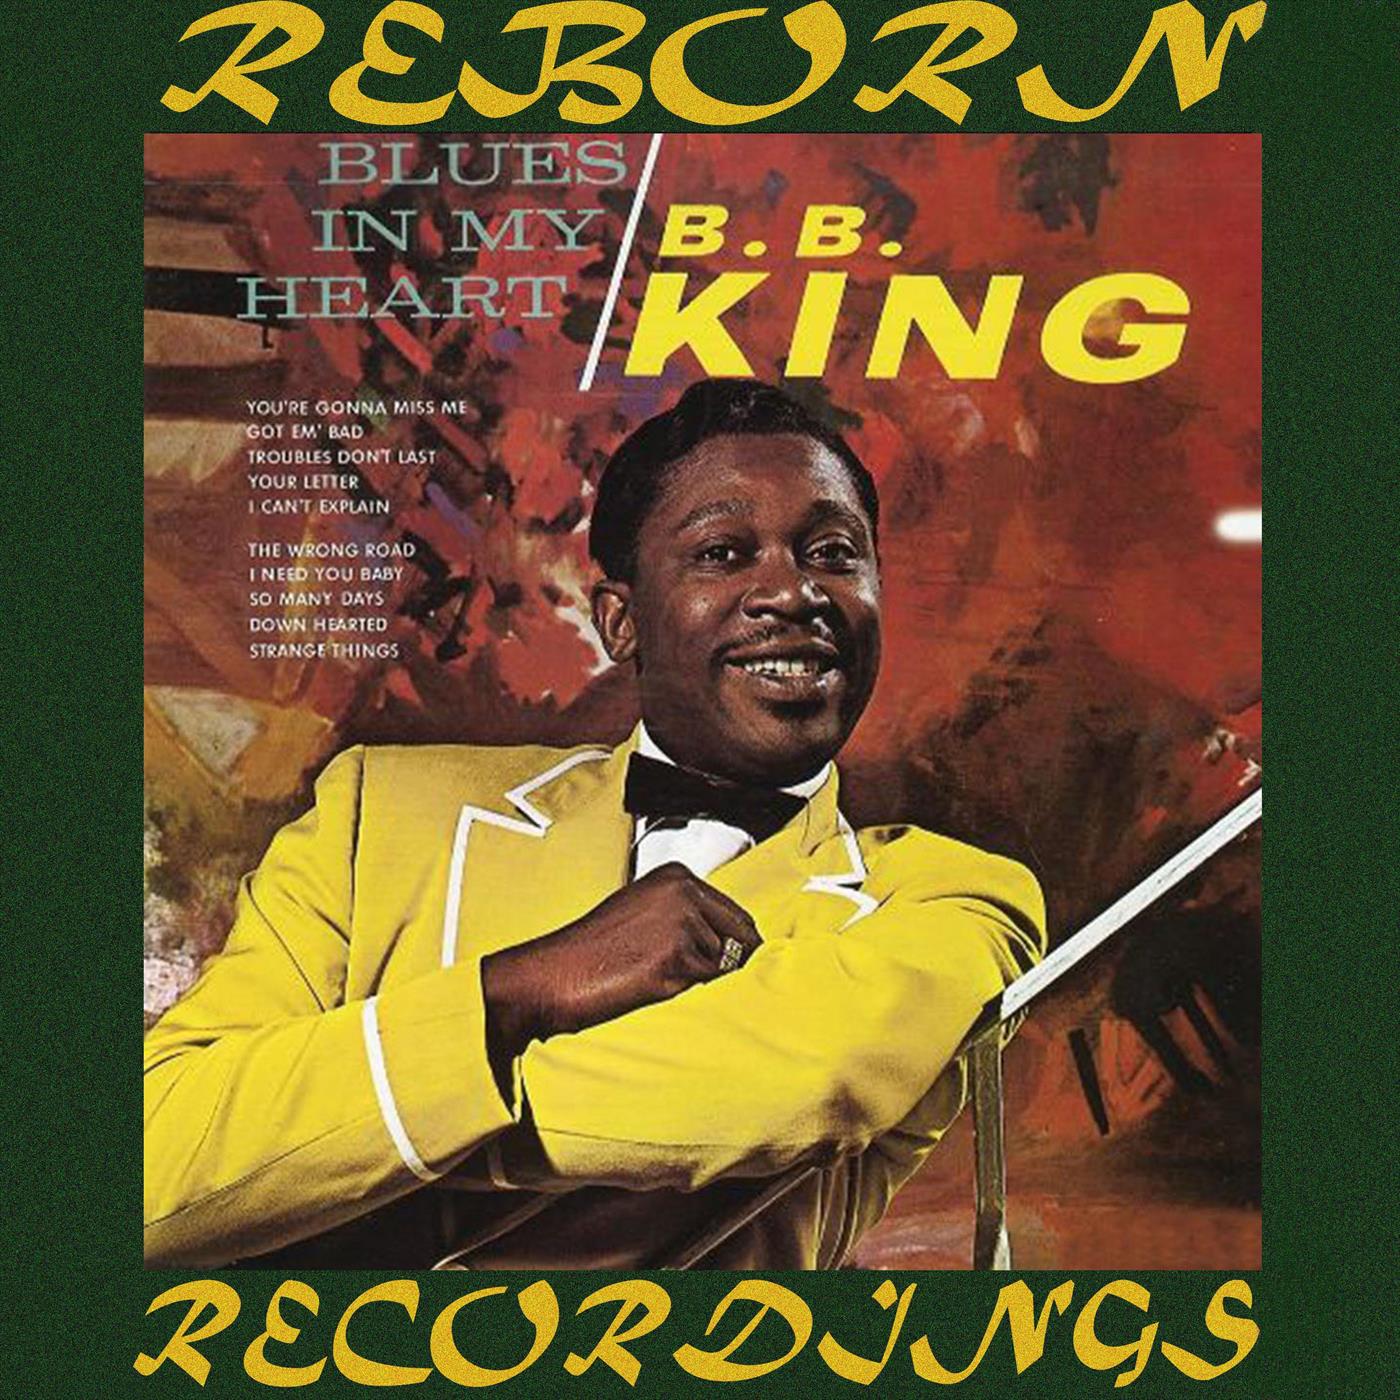 B.B. King – Blues in My Heart (Hd Remastered) (2020/2023) [Official Digital Download 24bit/48kHz]